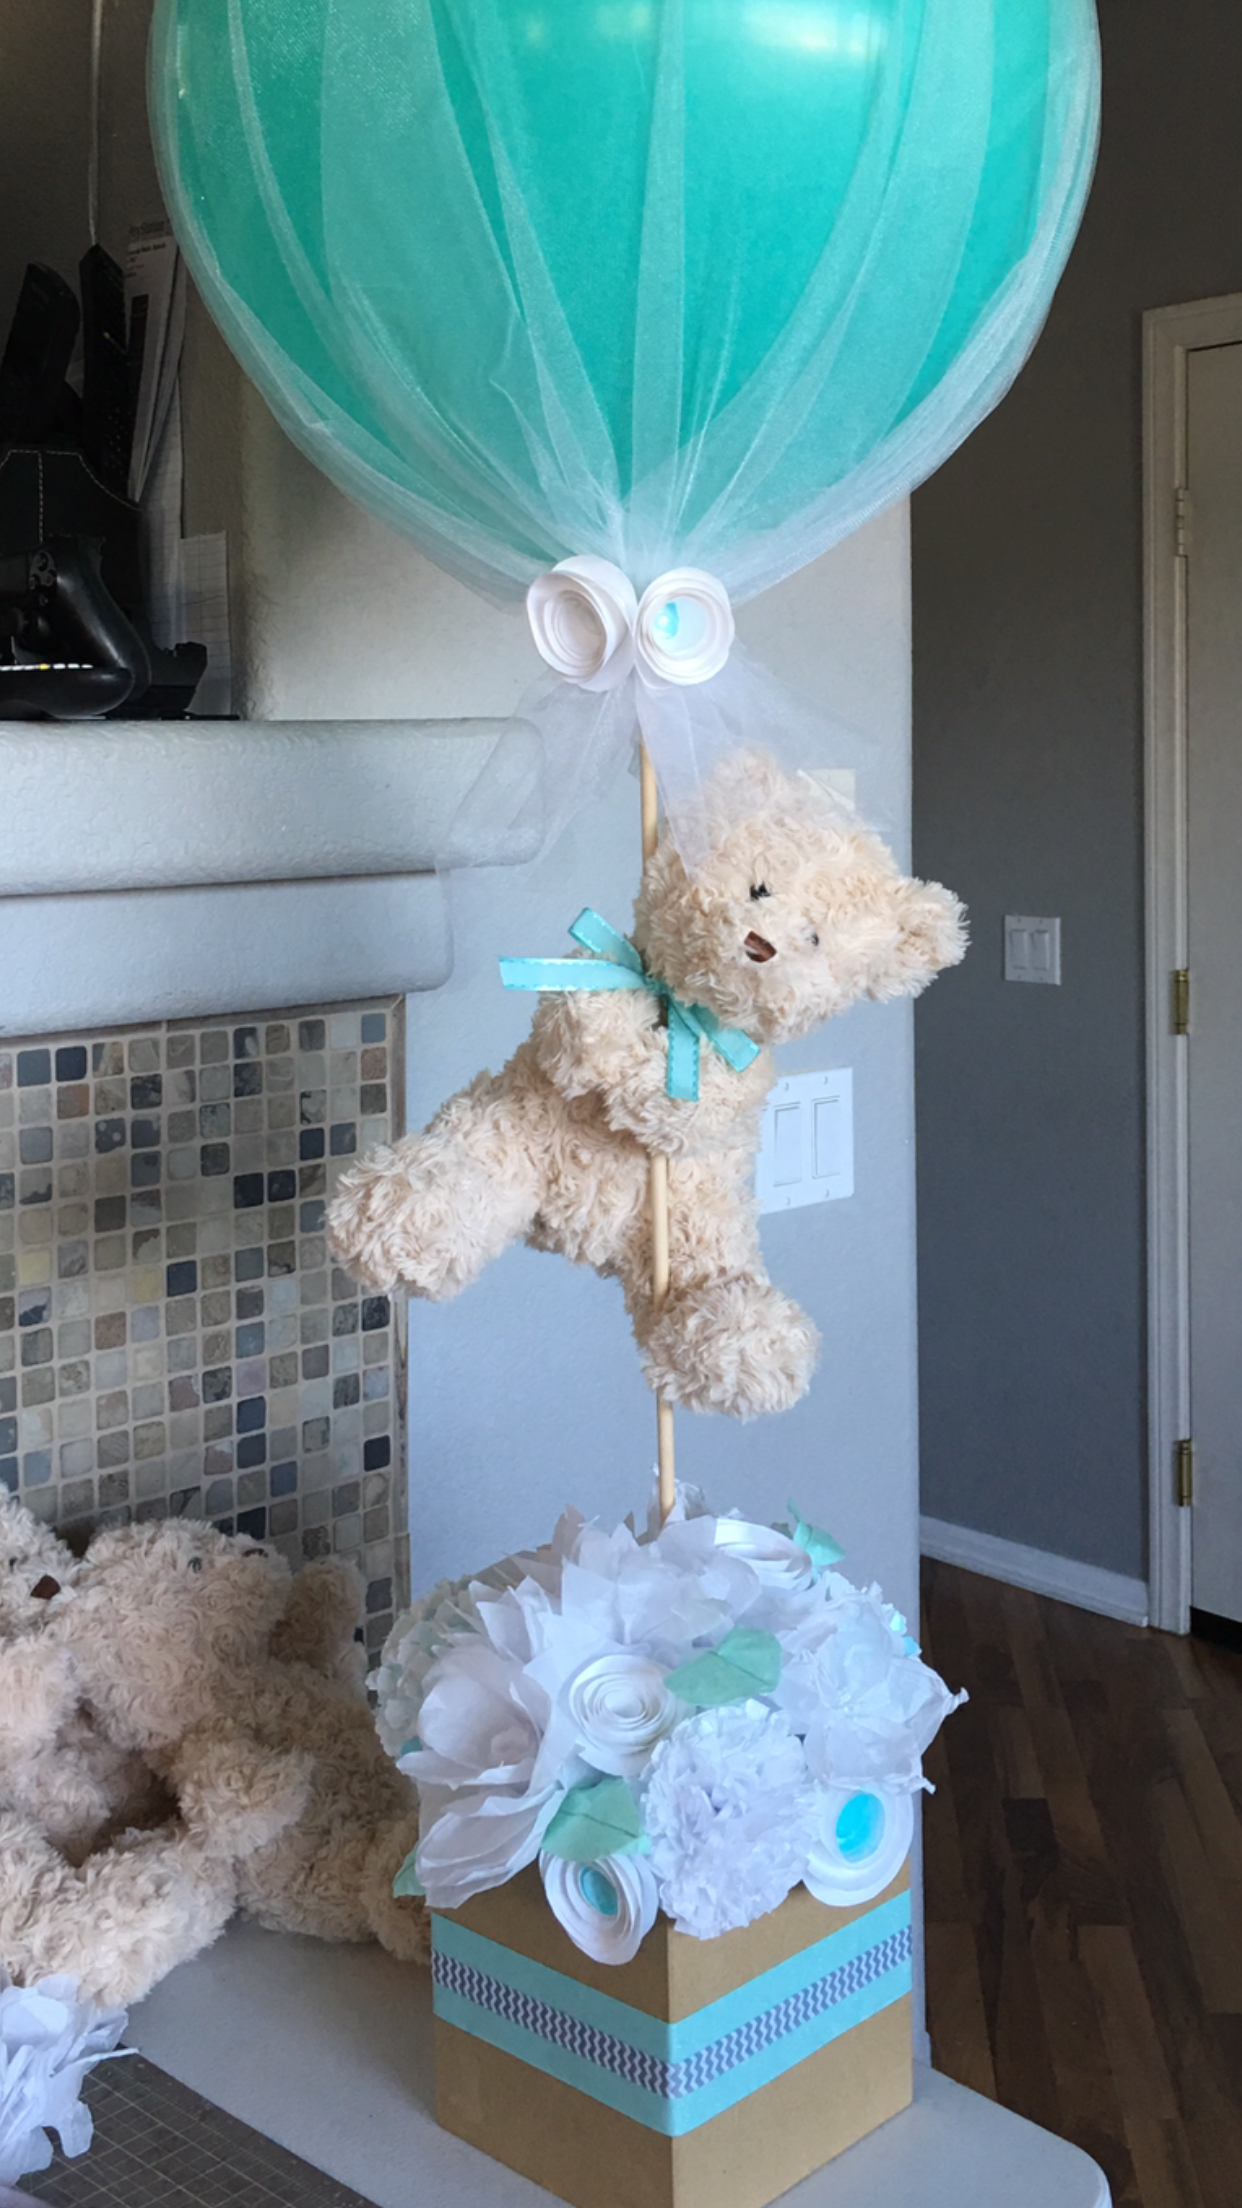 10 Most Recommended Idea For A Baby Shower 10 gender reveal party food ideas for your family baby shower 2022